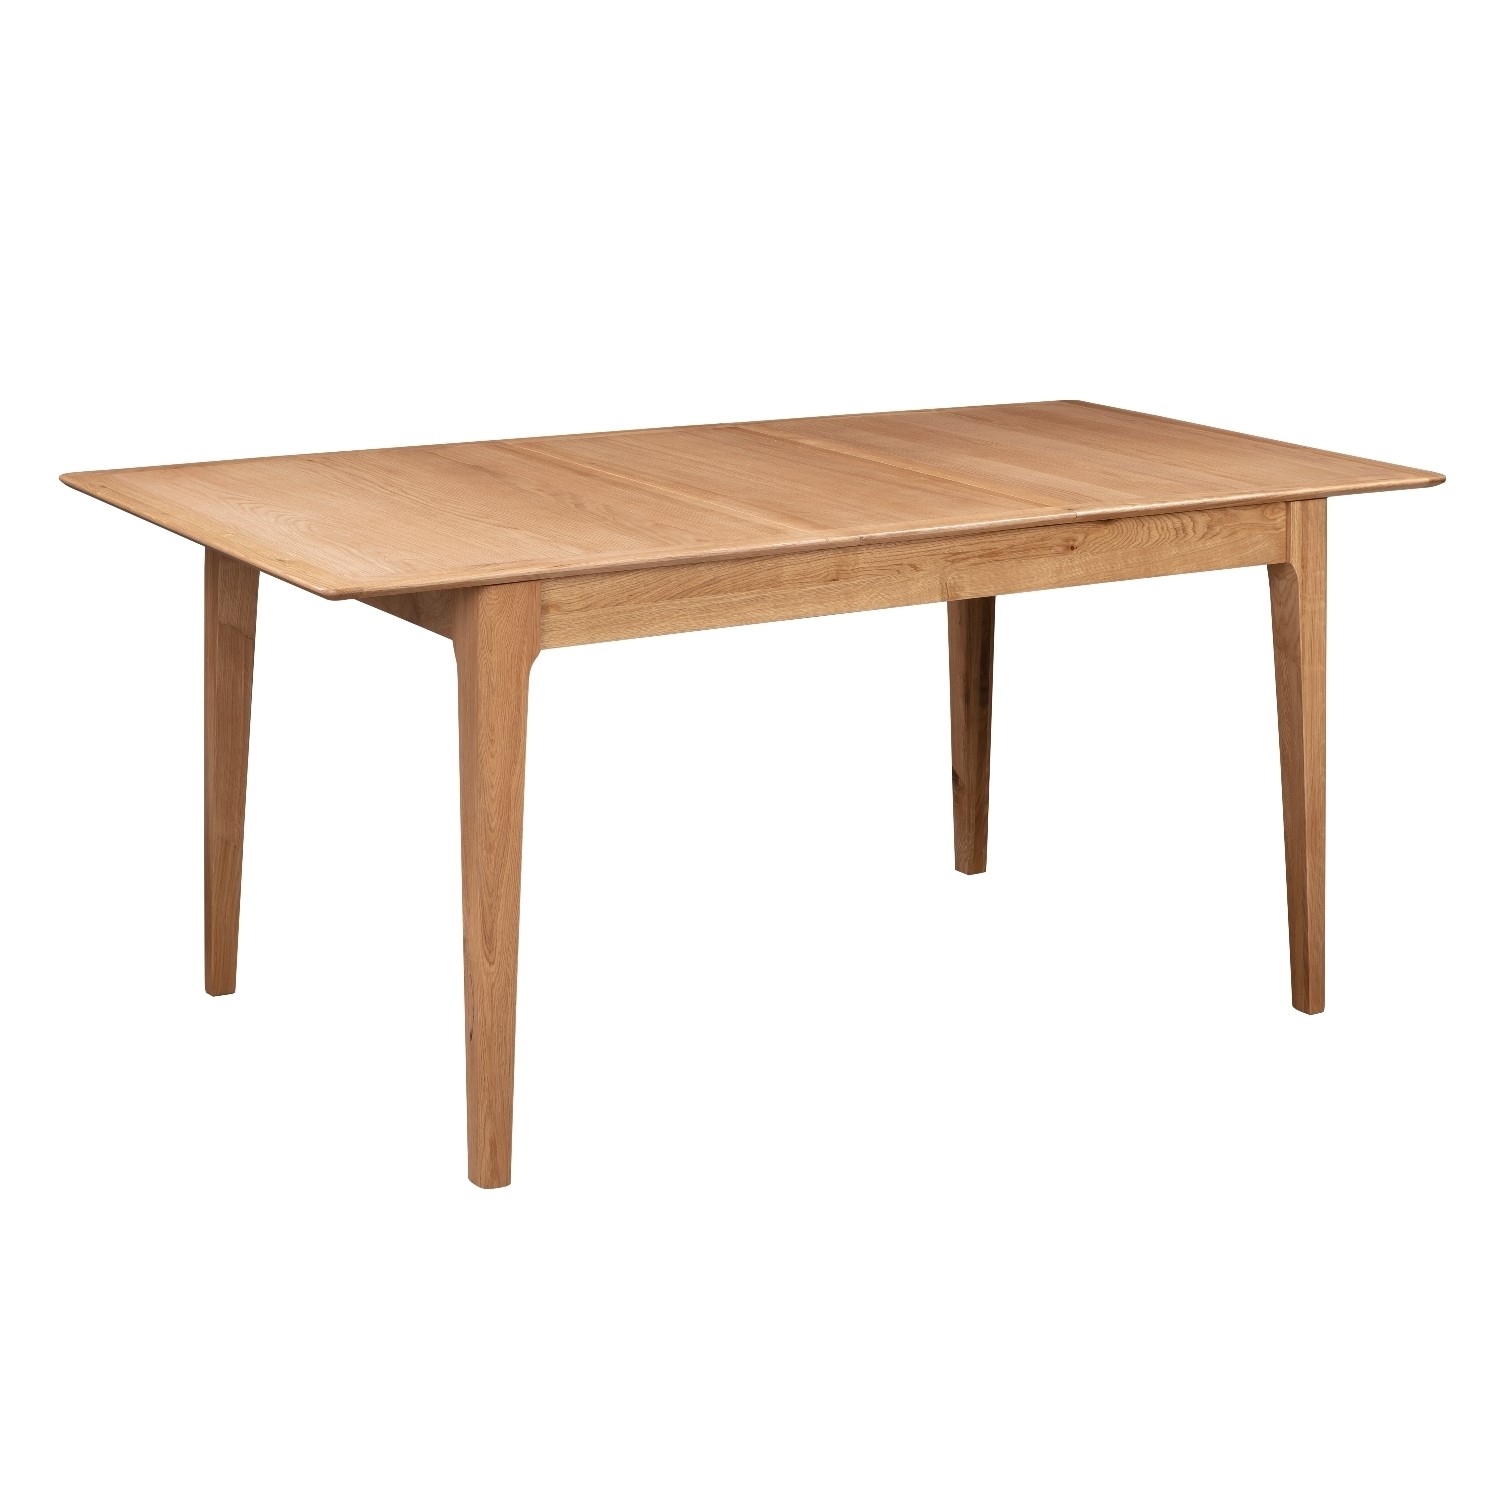 Extendable Dining Table in Solid Oak - Seats 6 - Adeline